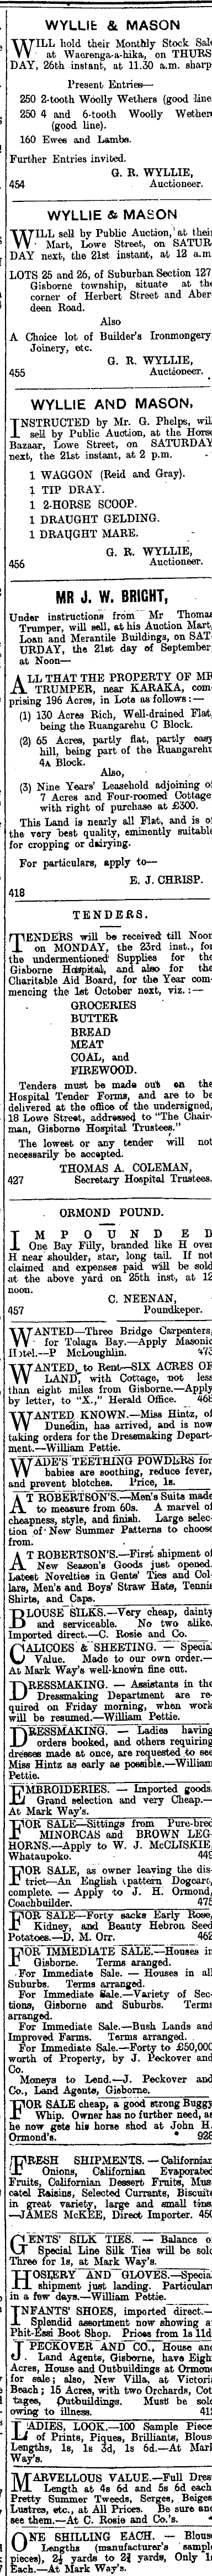 Papers Past Newspapers Poverty Bay Herald 19 September 1901 Page 3 Advertisements Column 4